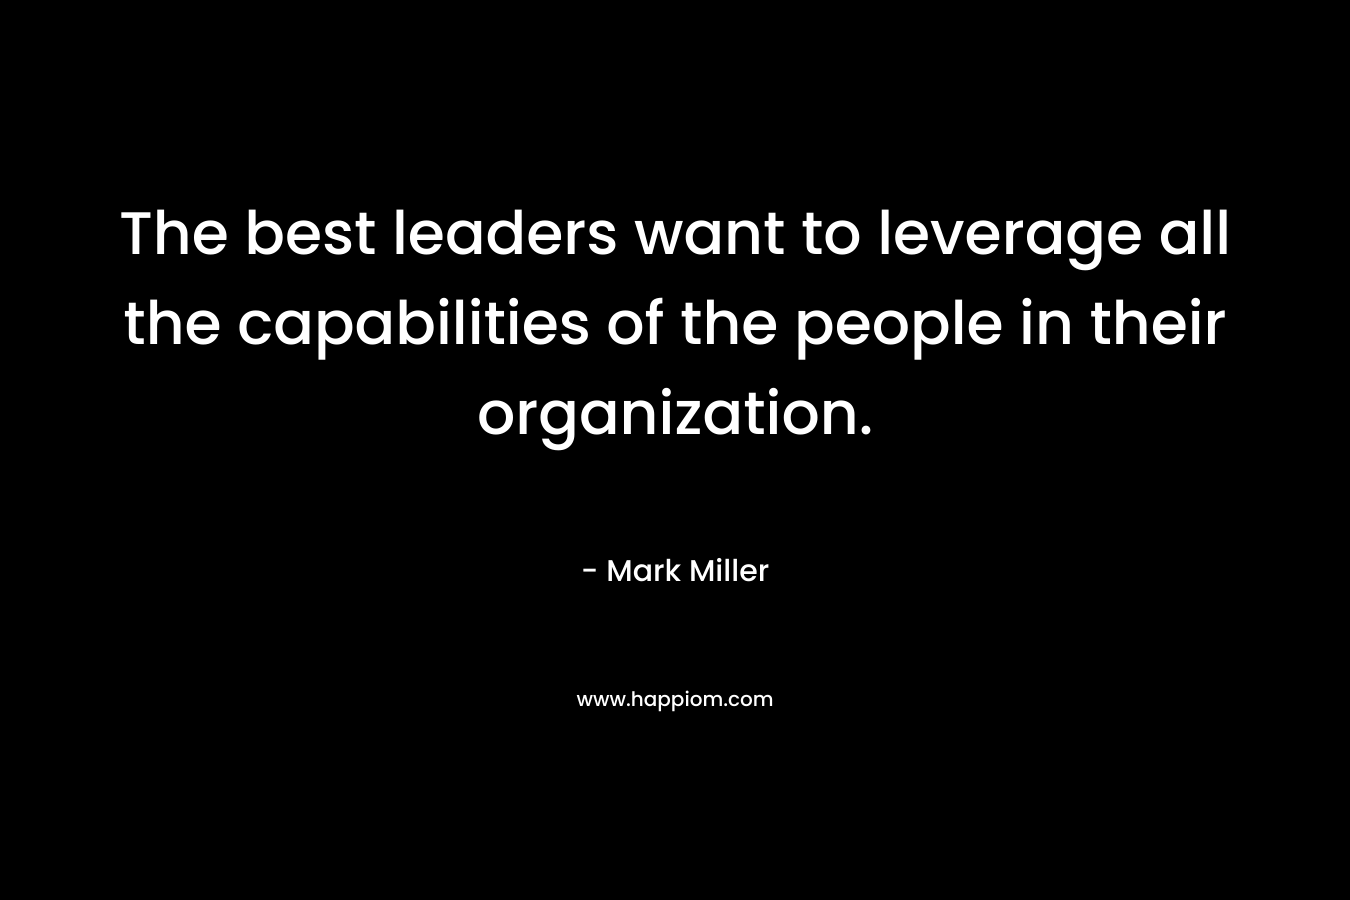 The best leaders want to leverage all the capabilities of the people in their organization.